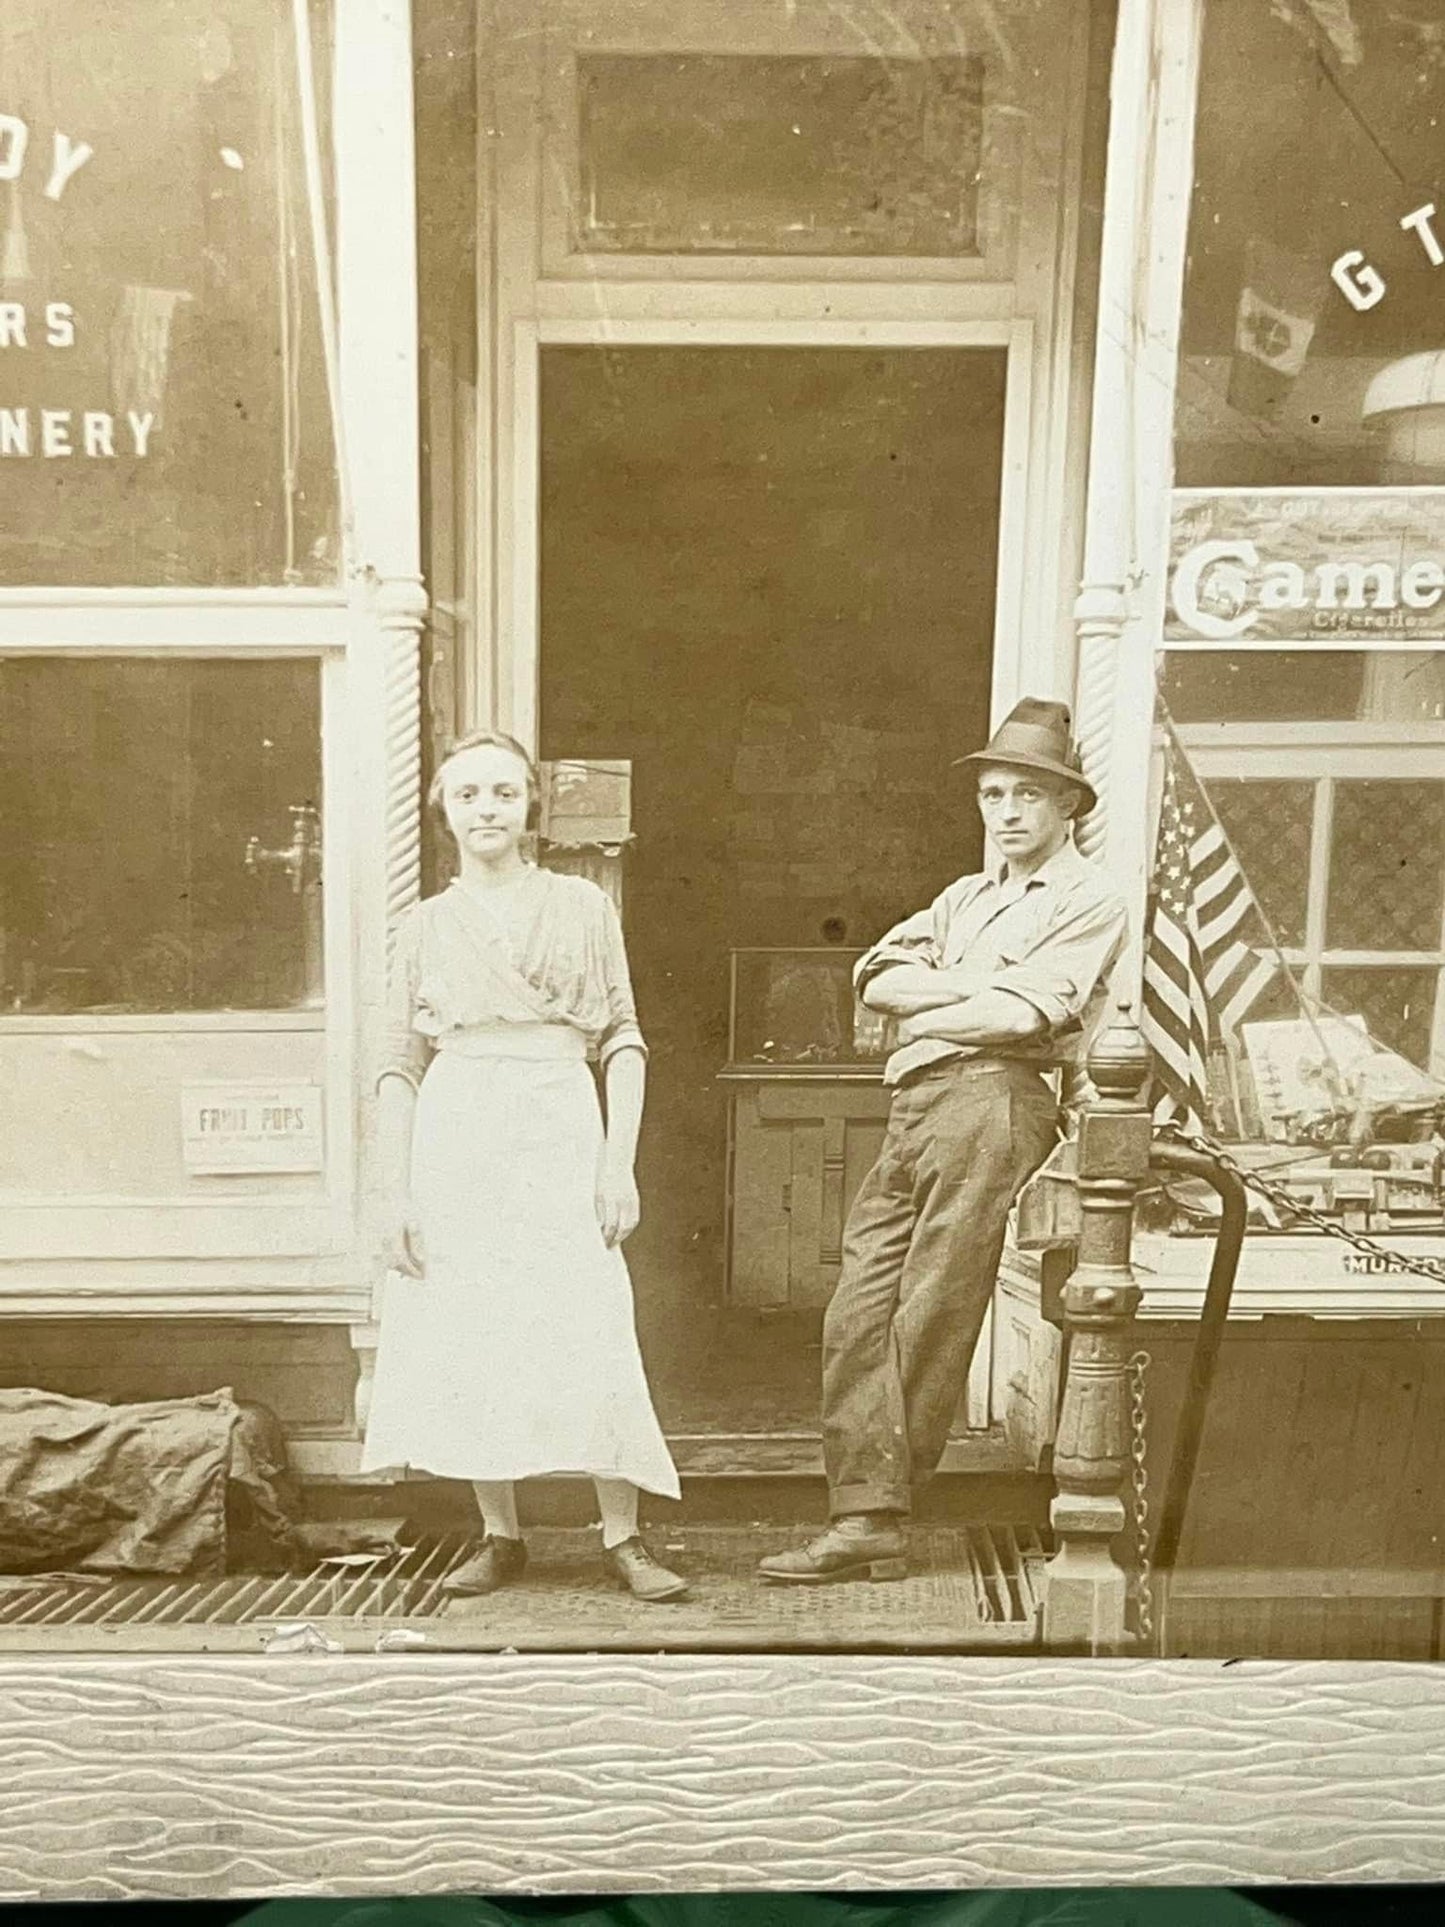 Antique mounted photo 1890s 1900s occupational Candy store & tobacco American flags in window camel advertising